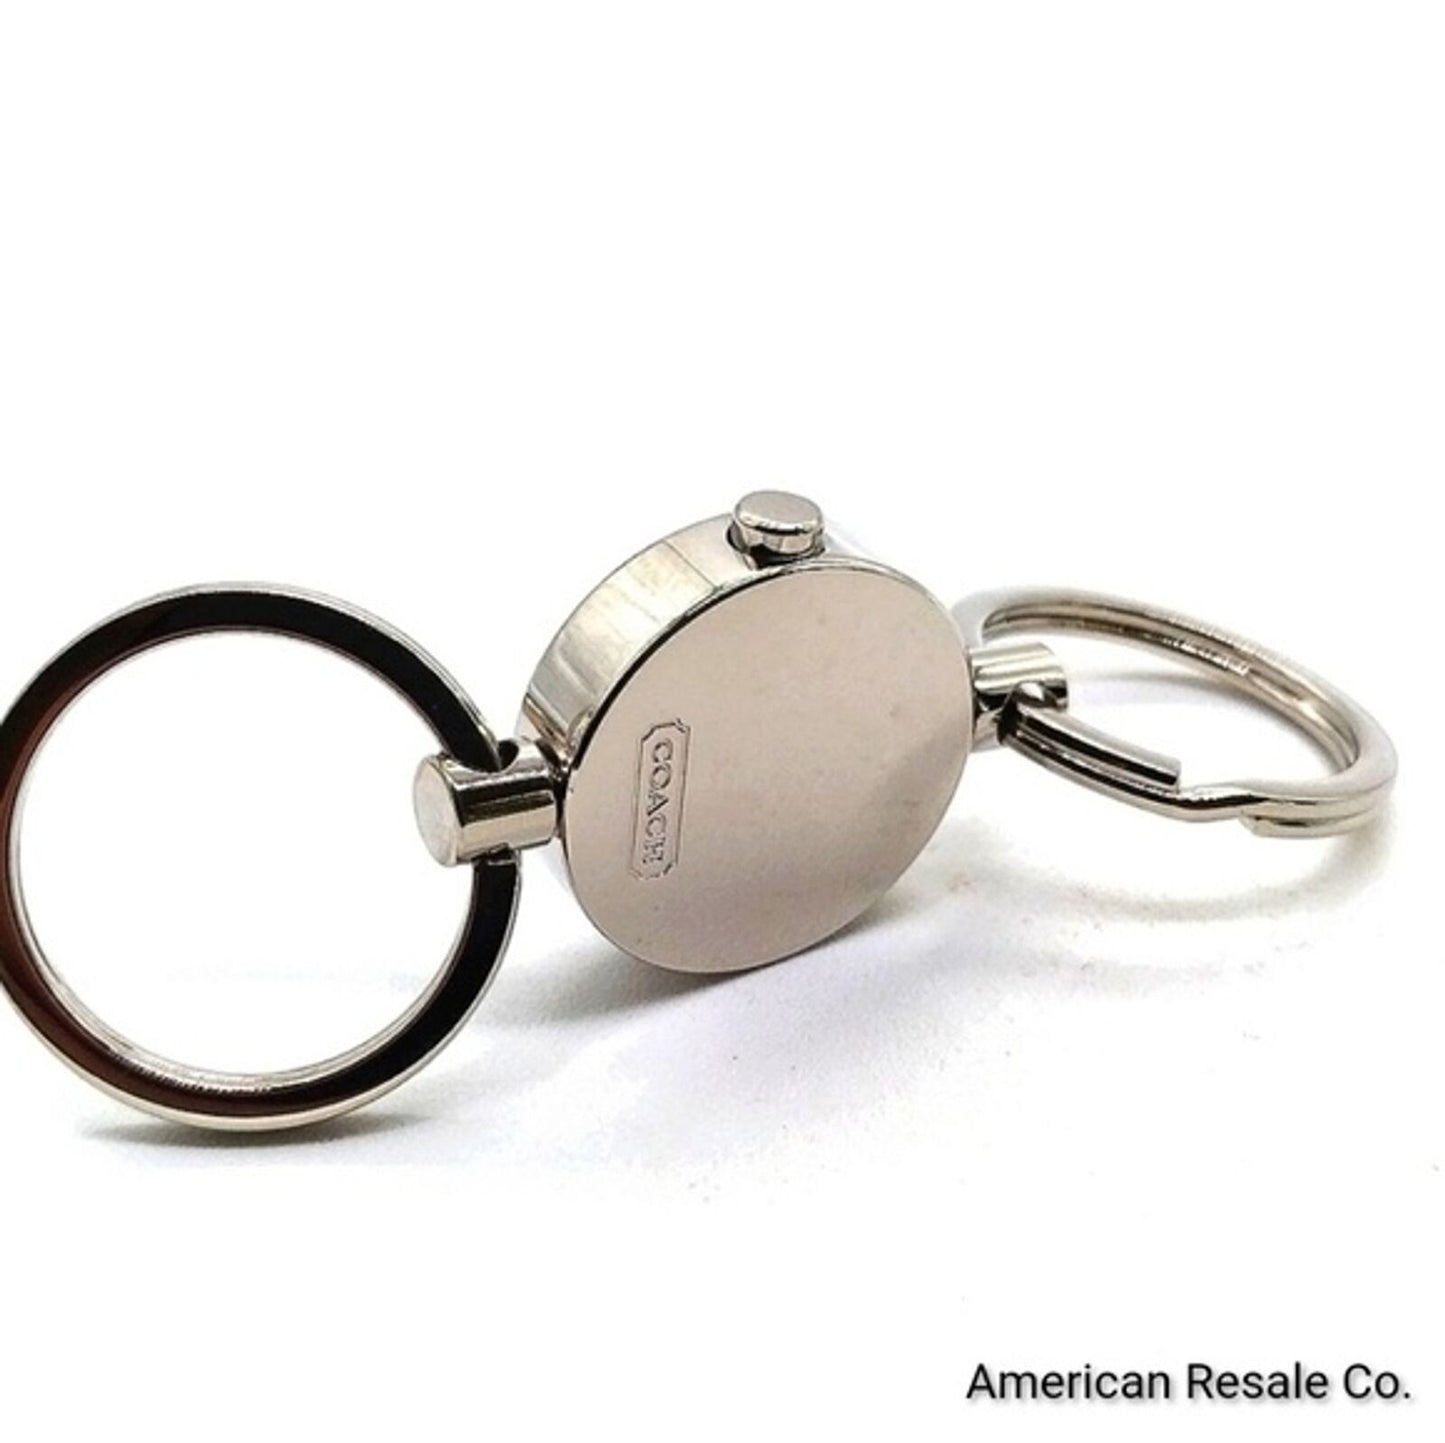 COACH Vintage Burgundy Dual Keychain fob with Release for Valet